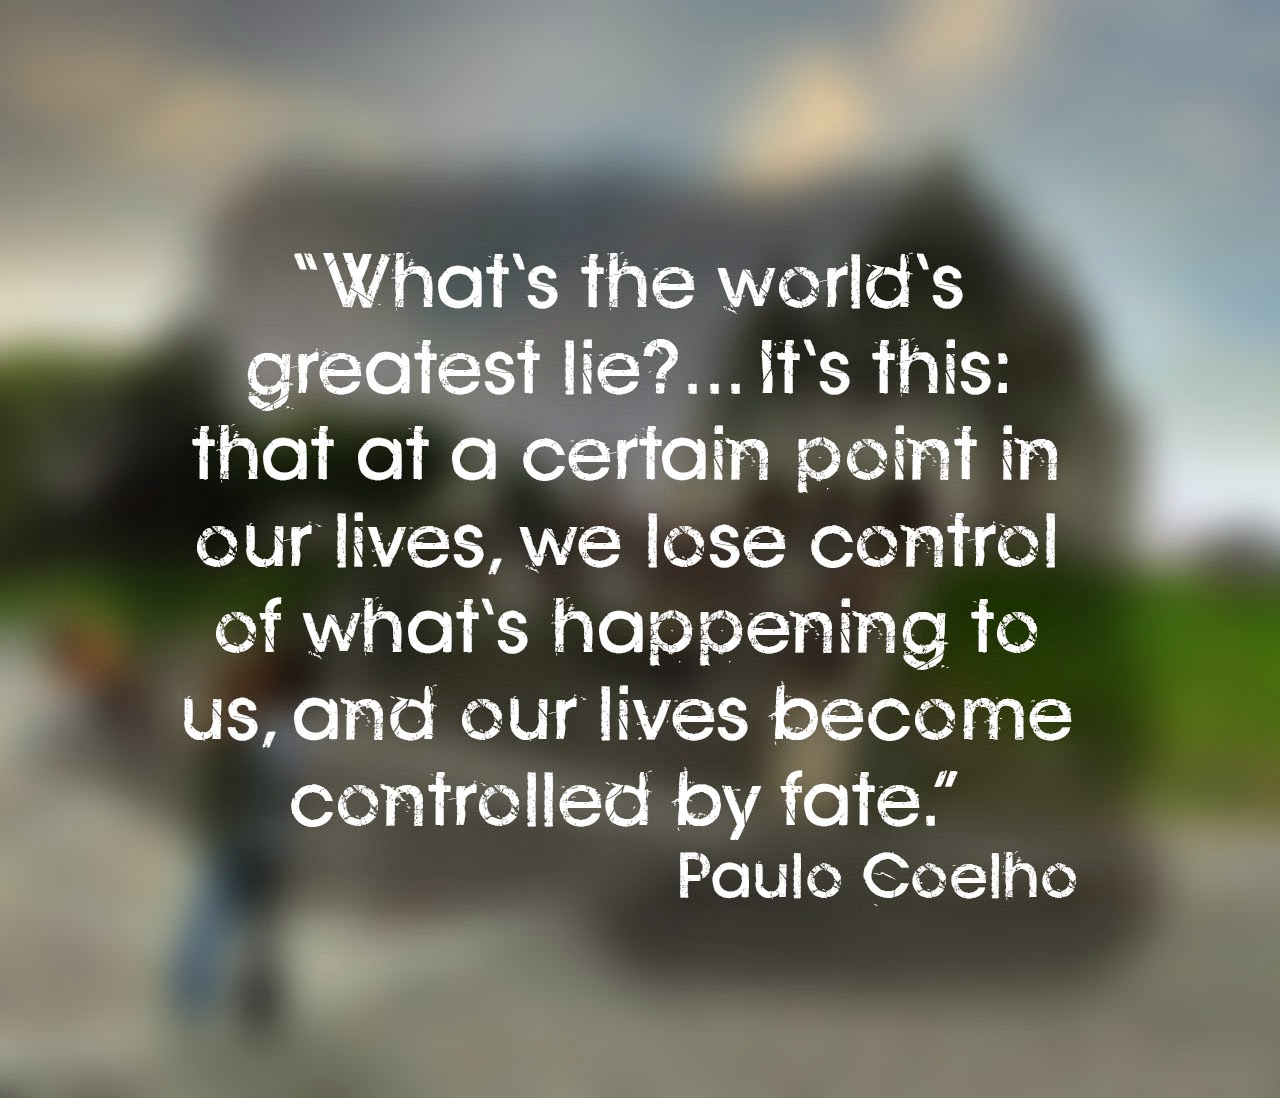 It s this that at a certain point in our lives we lose control of what s happening to us and our lives be e controlled by fate ” Paulo Coelho